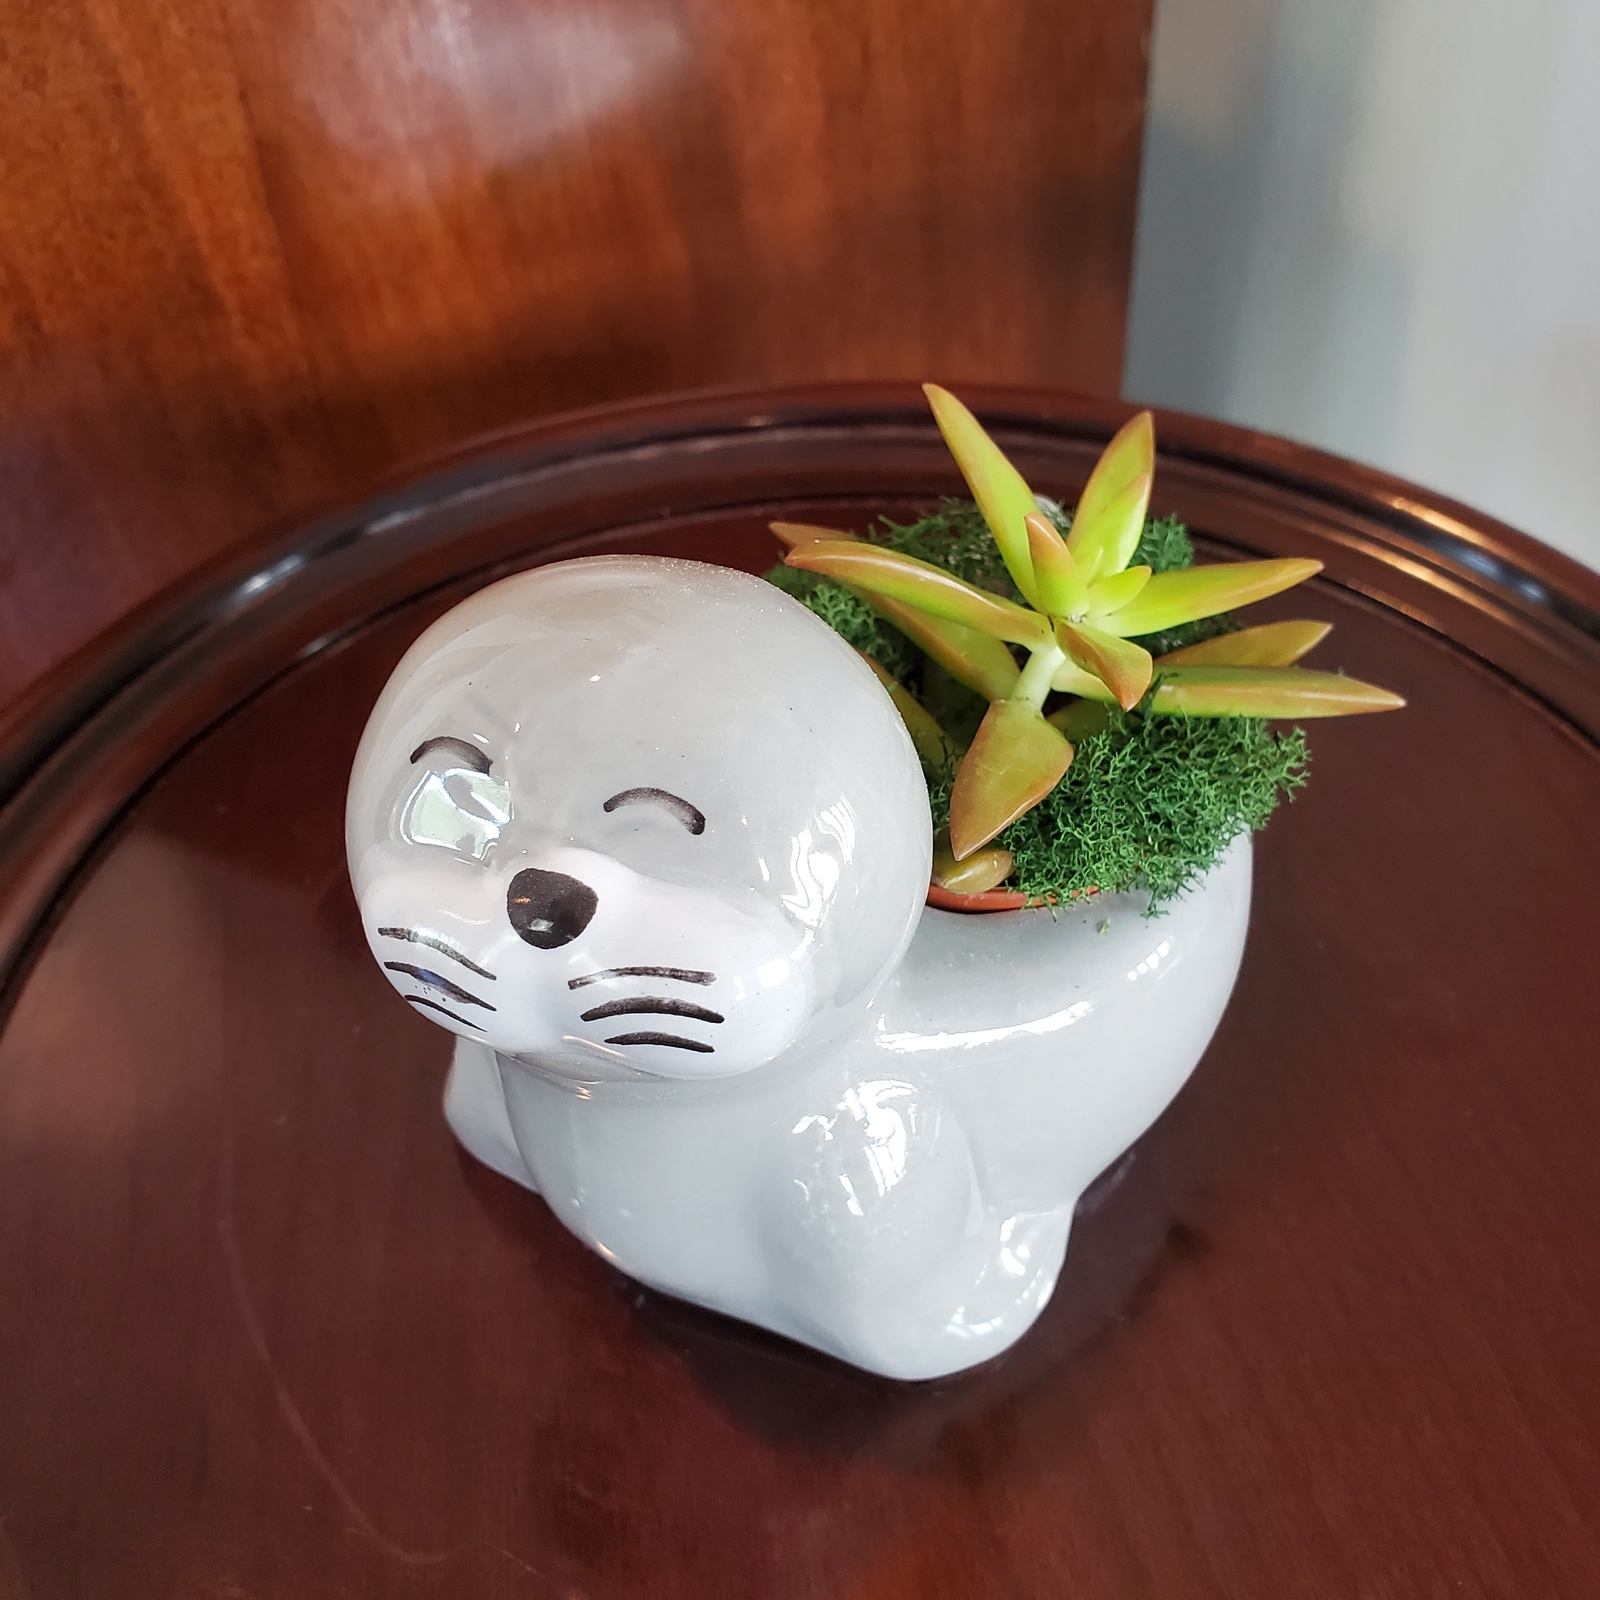 Seal Planter with Live Succulent, Stanley the Seal, Animal Planter Plant Pot - $19.99